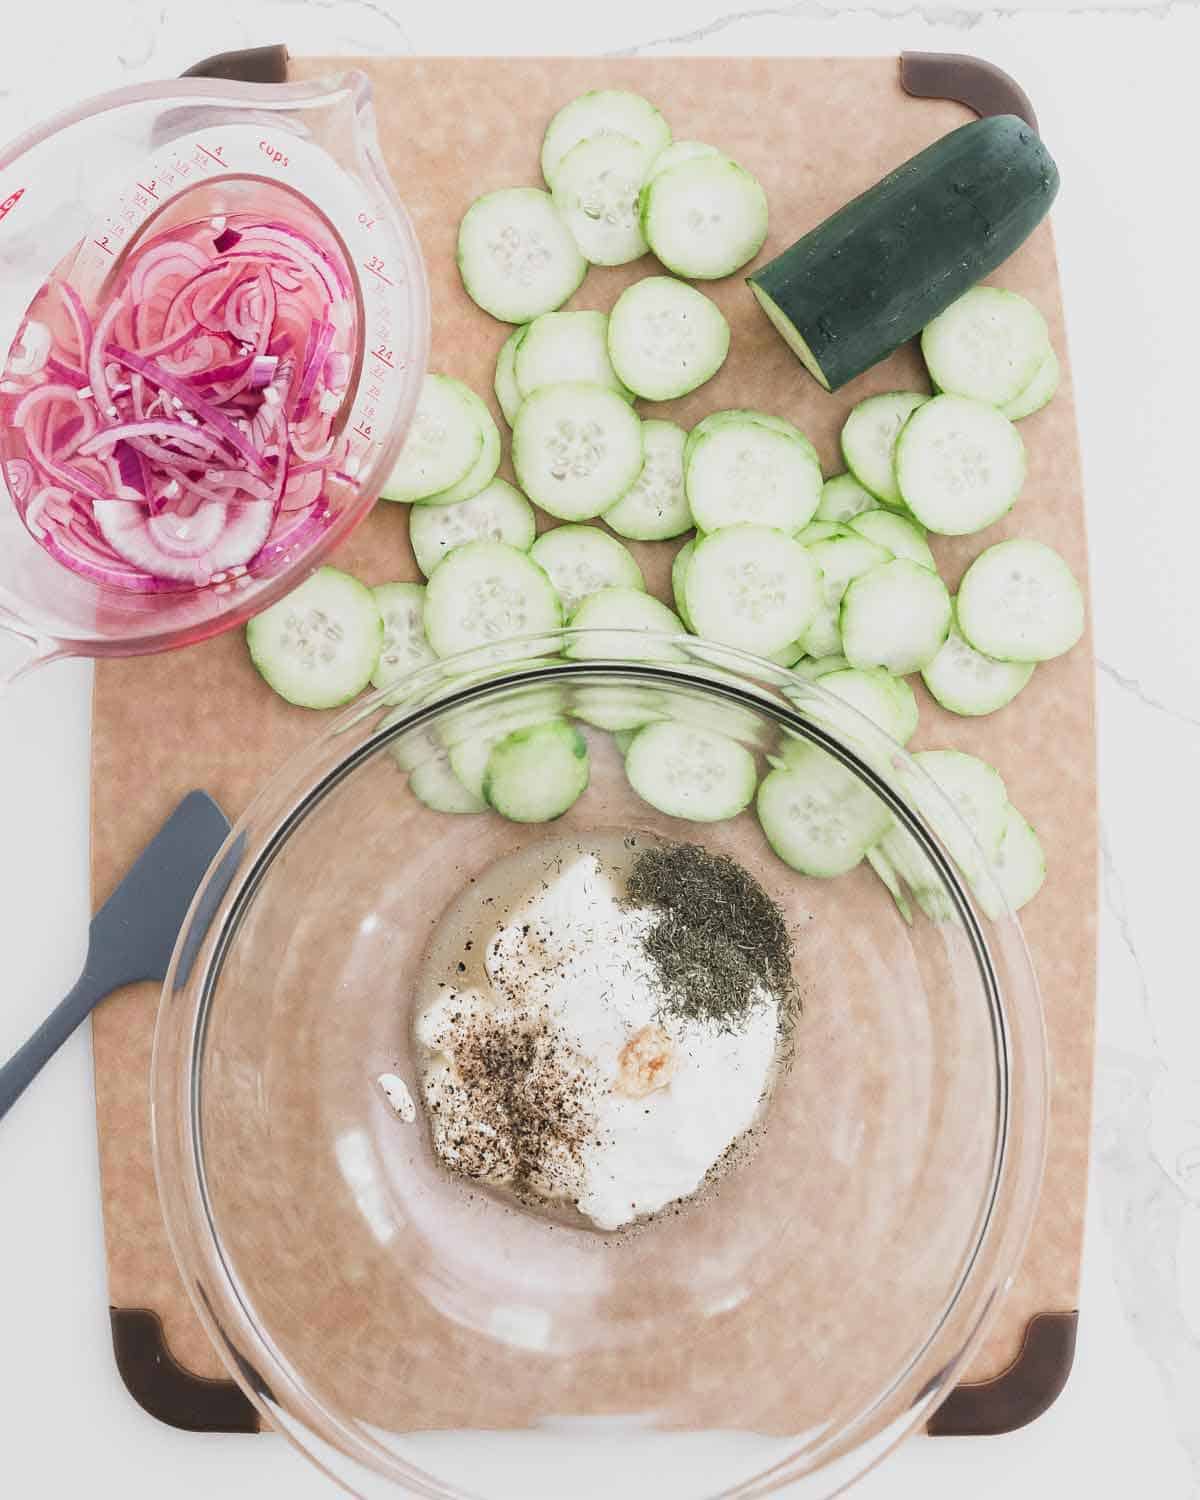 How to make an easy, refreshing and healthier creamy cucumber salad recipe for all your summer cookouts and parties!